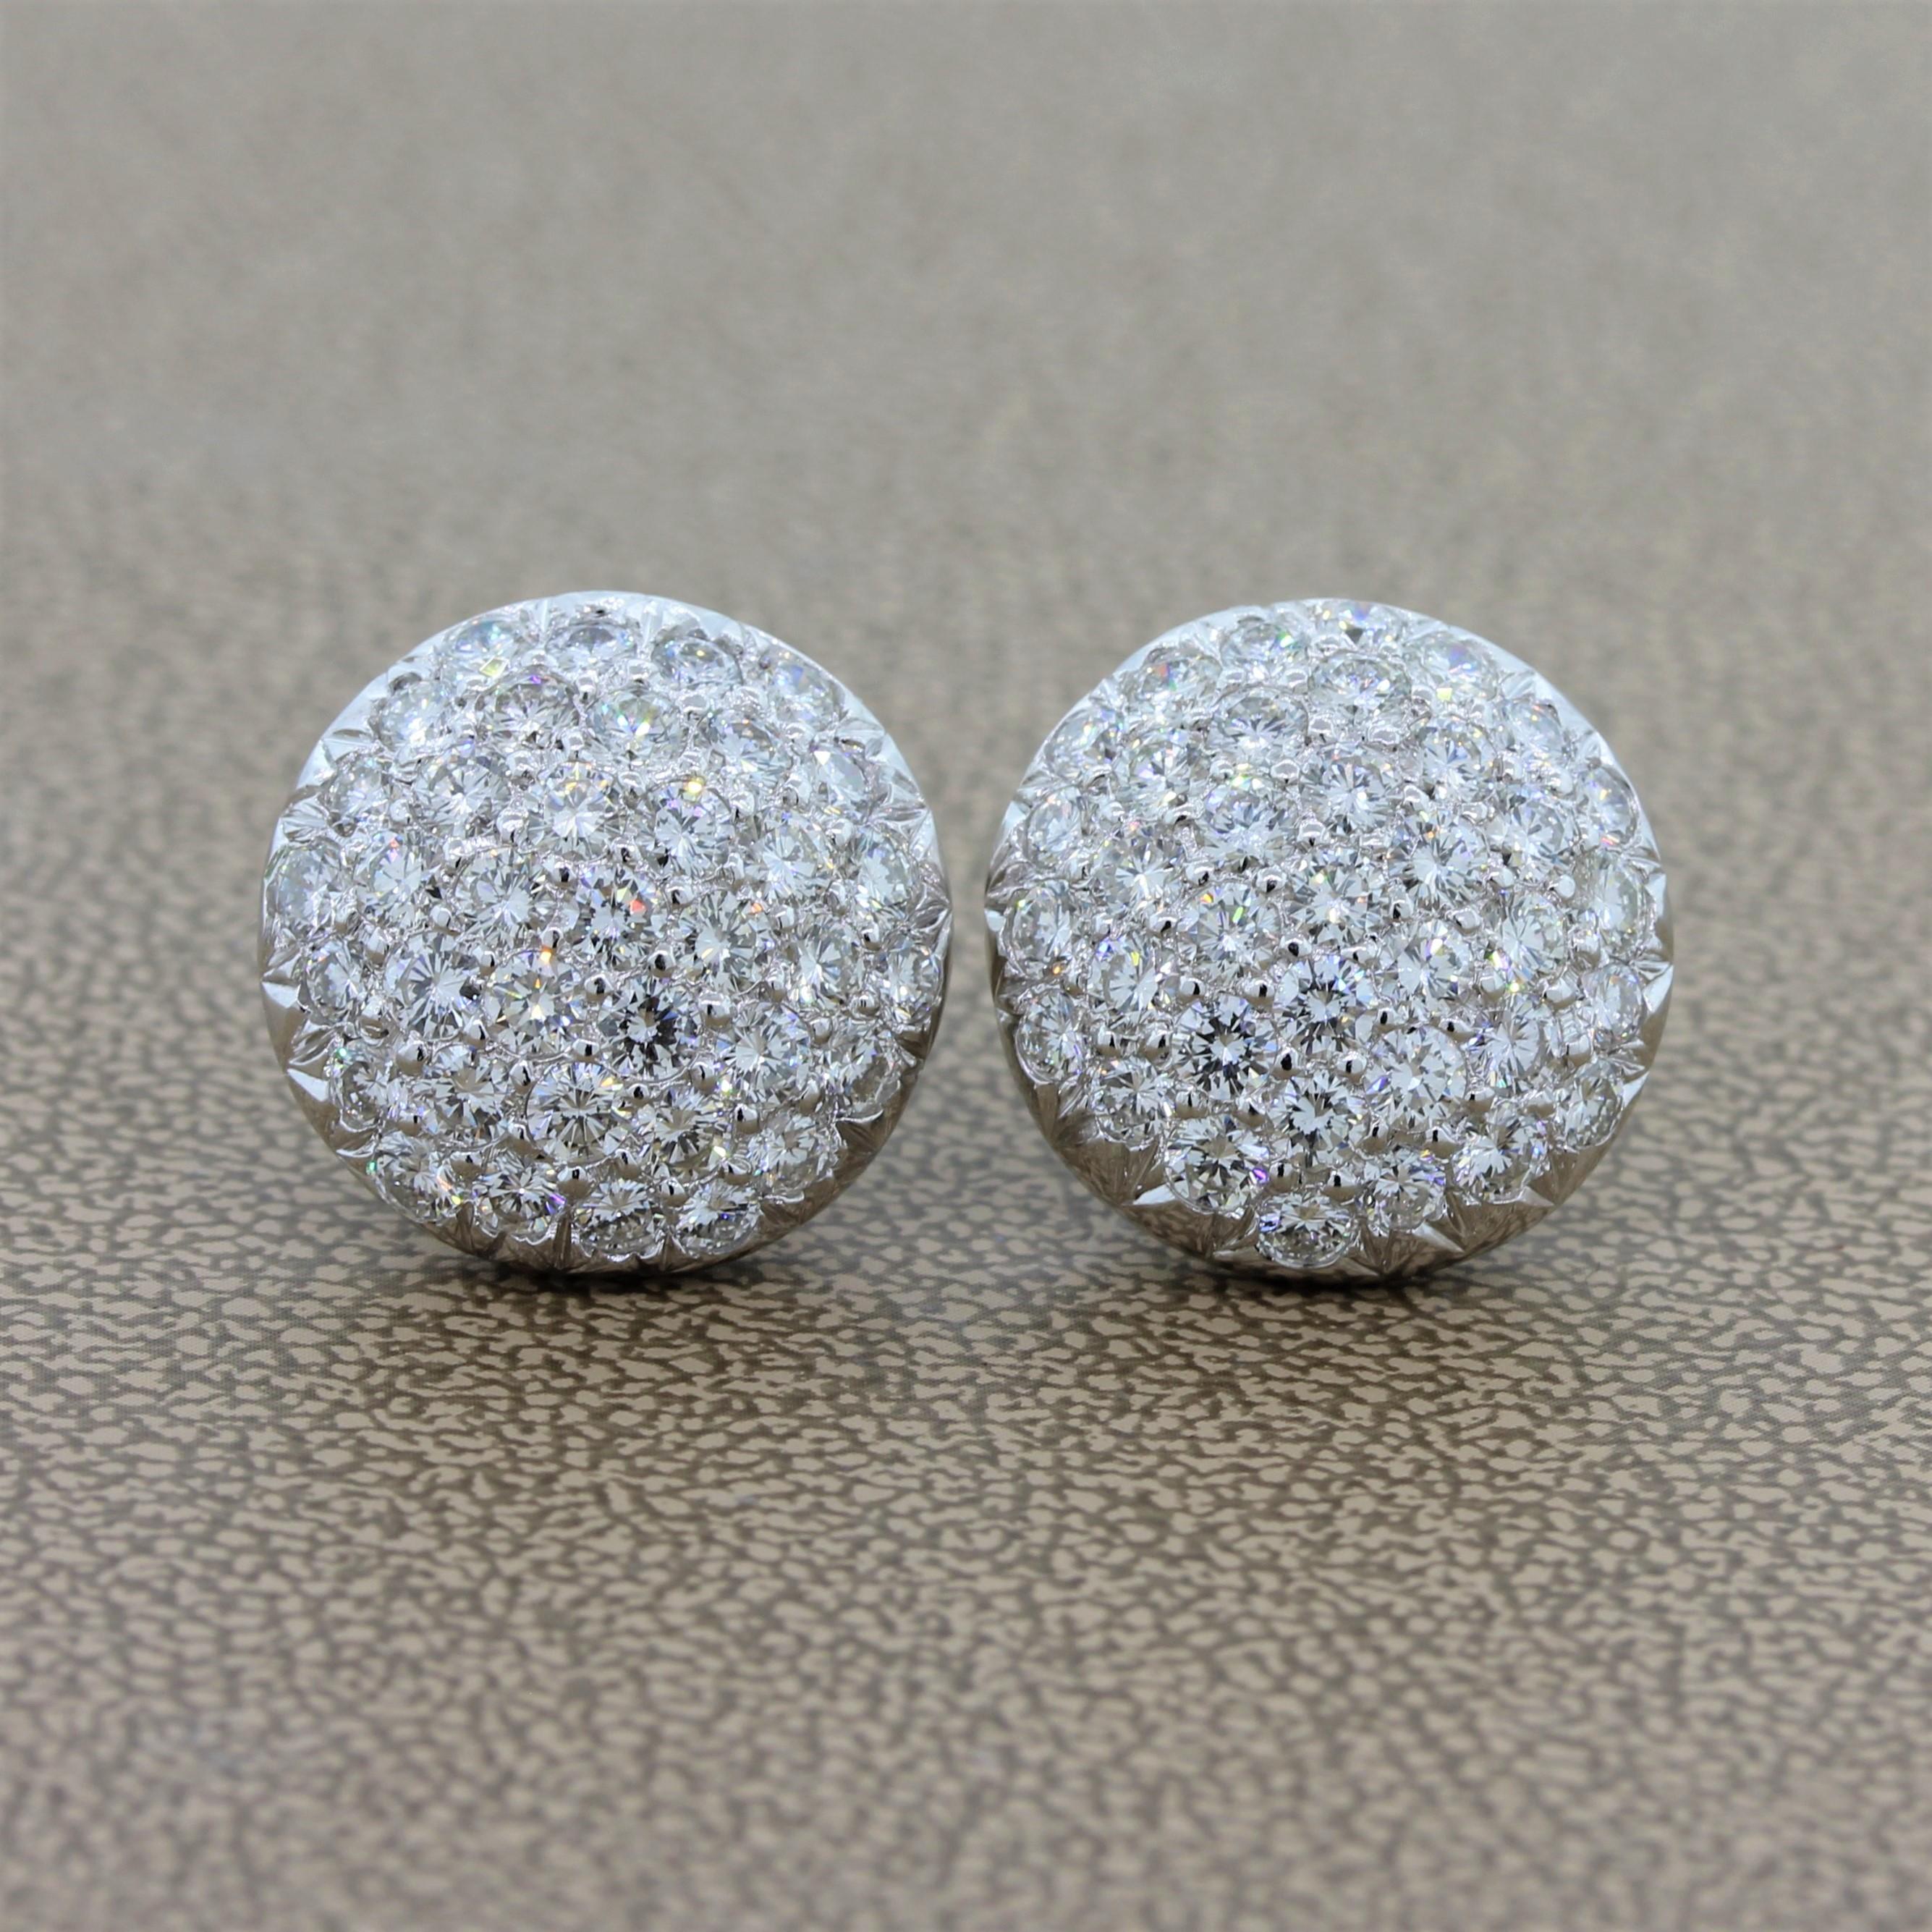 A glamorous pair of button earrings featuring 4.00 carats of VS quality diamonds in a platinum setting. The clustered round cut diamonds are prong set in a slightly convex fashion as these modern earrings gleam with vibrance. A high quality pair of